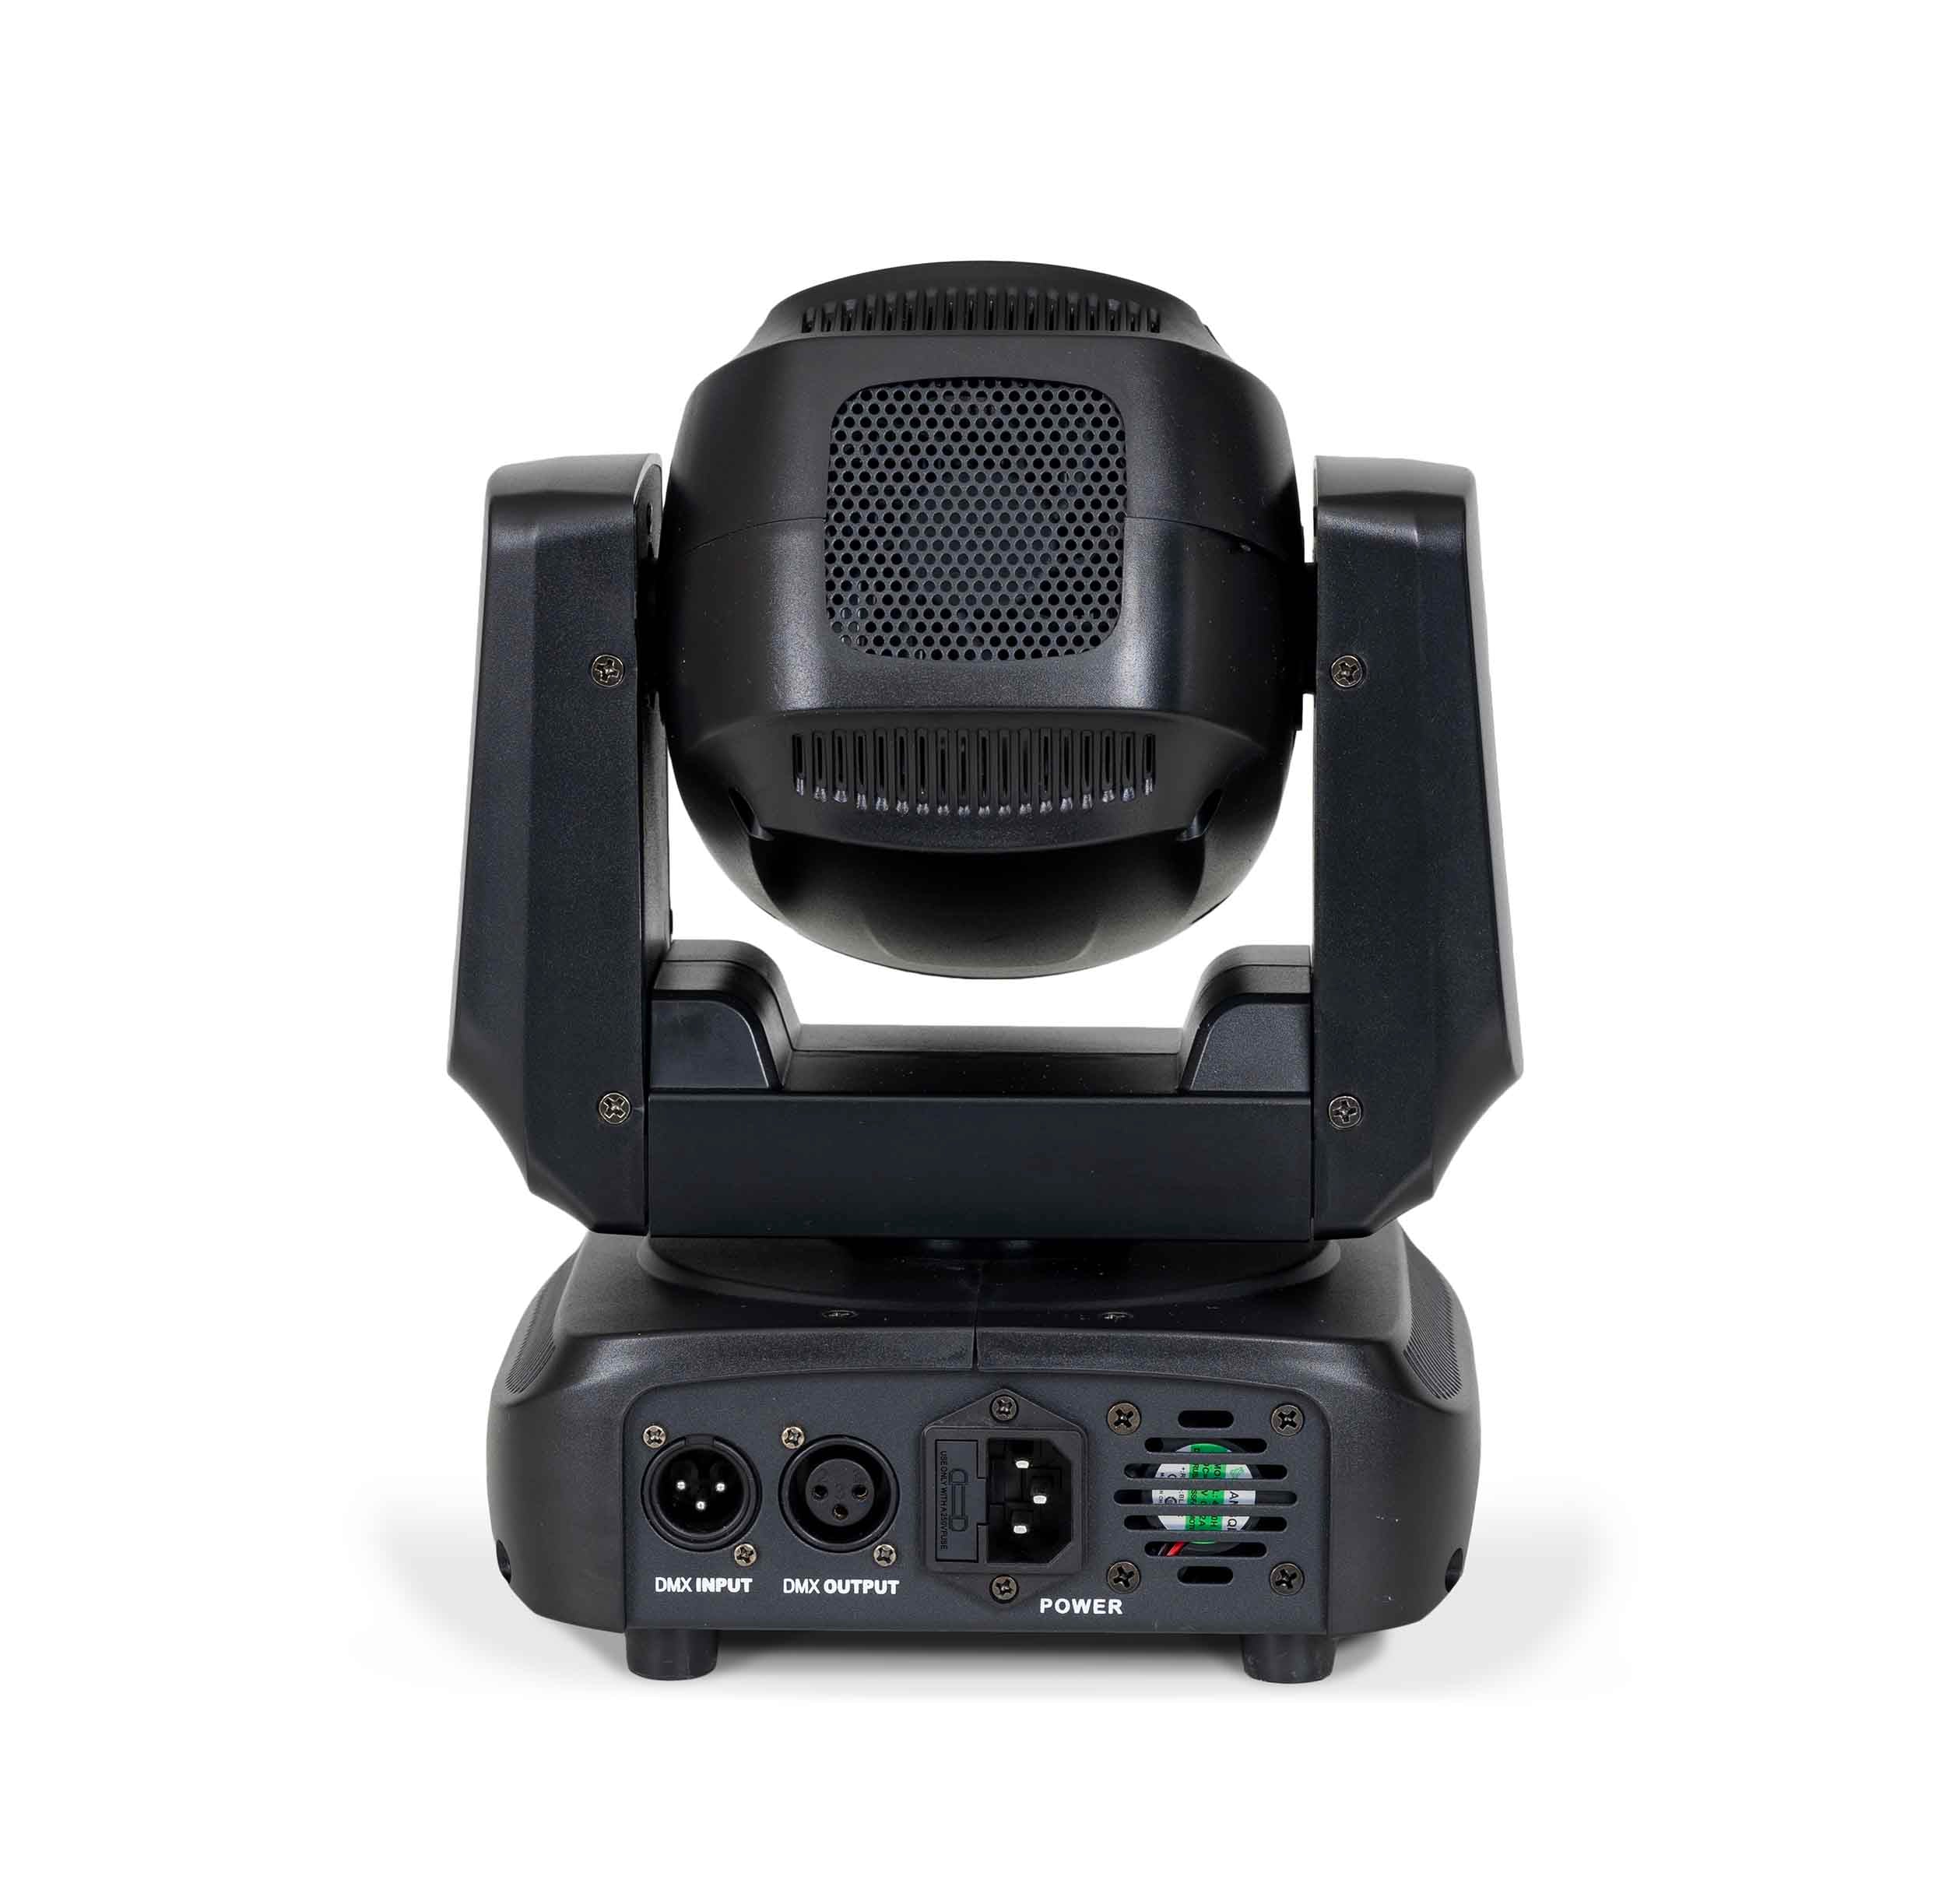 Colorkey CKU-5060, Compact 100-Watt Moving Head Beam with Rainbow Prism by ColorKey